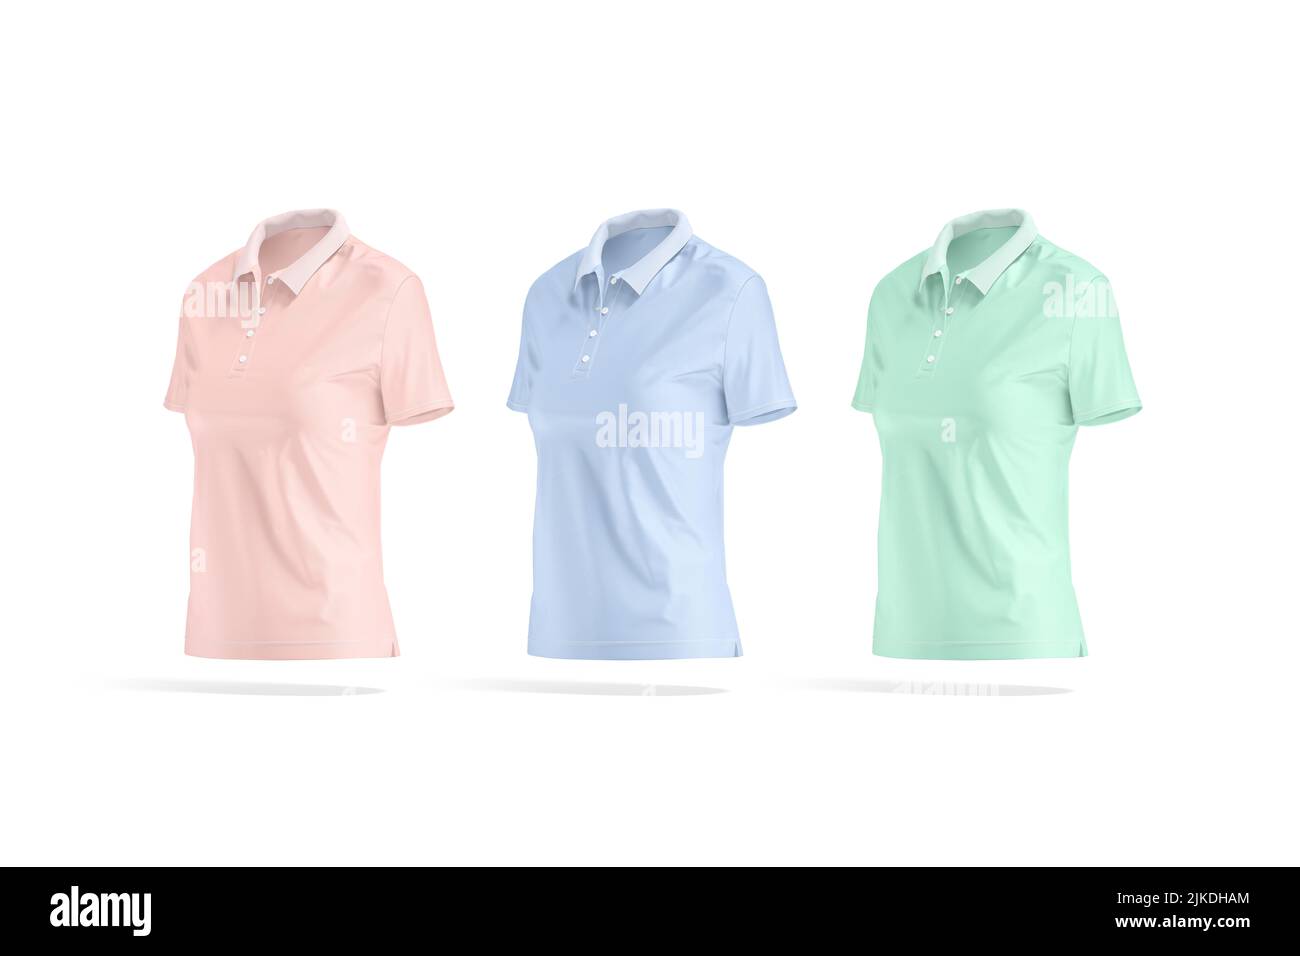 Blank colored women polo shirt mockup, side view Stock Photo